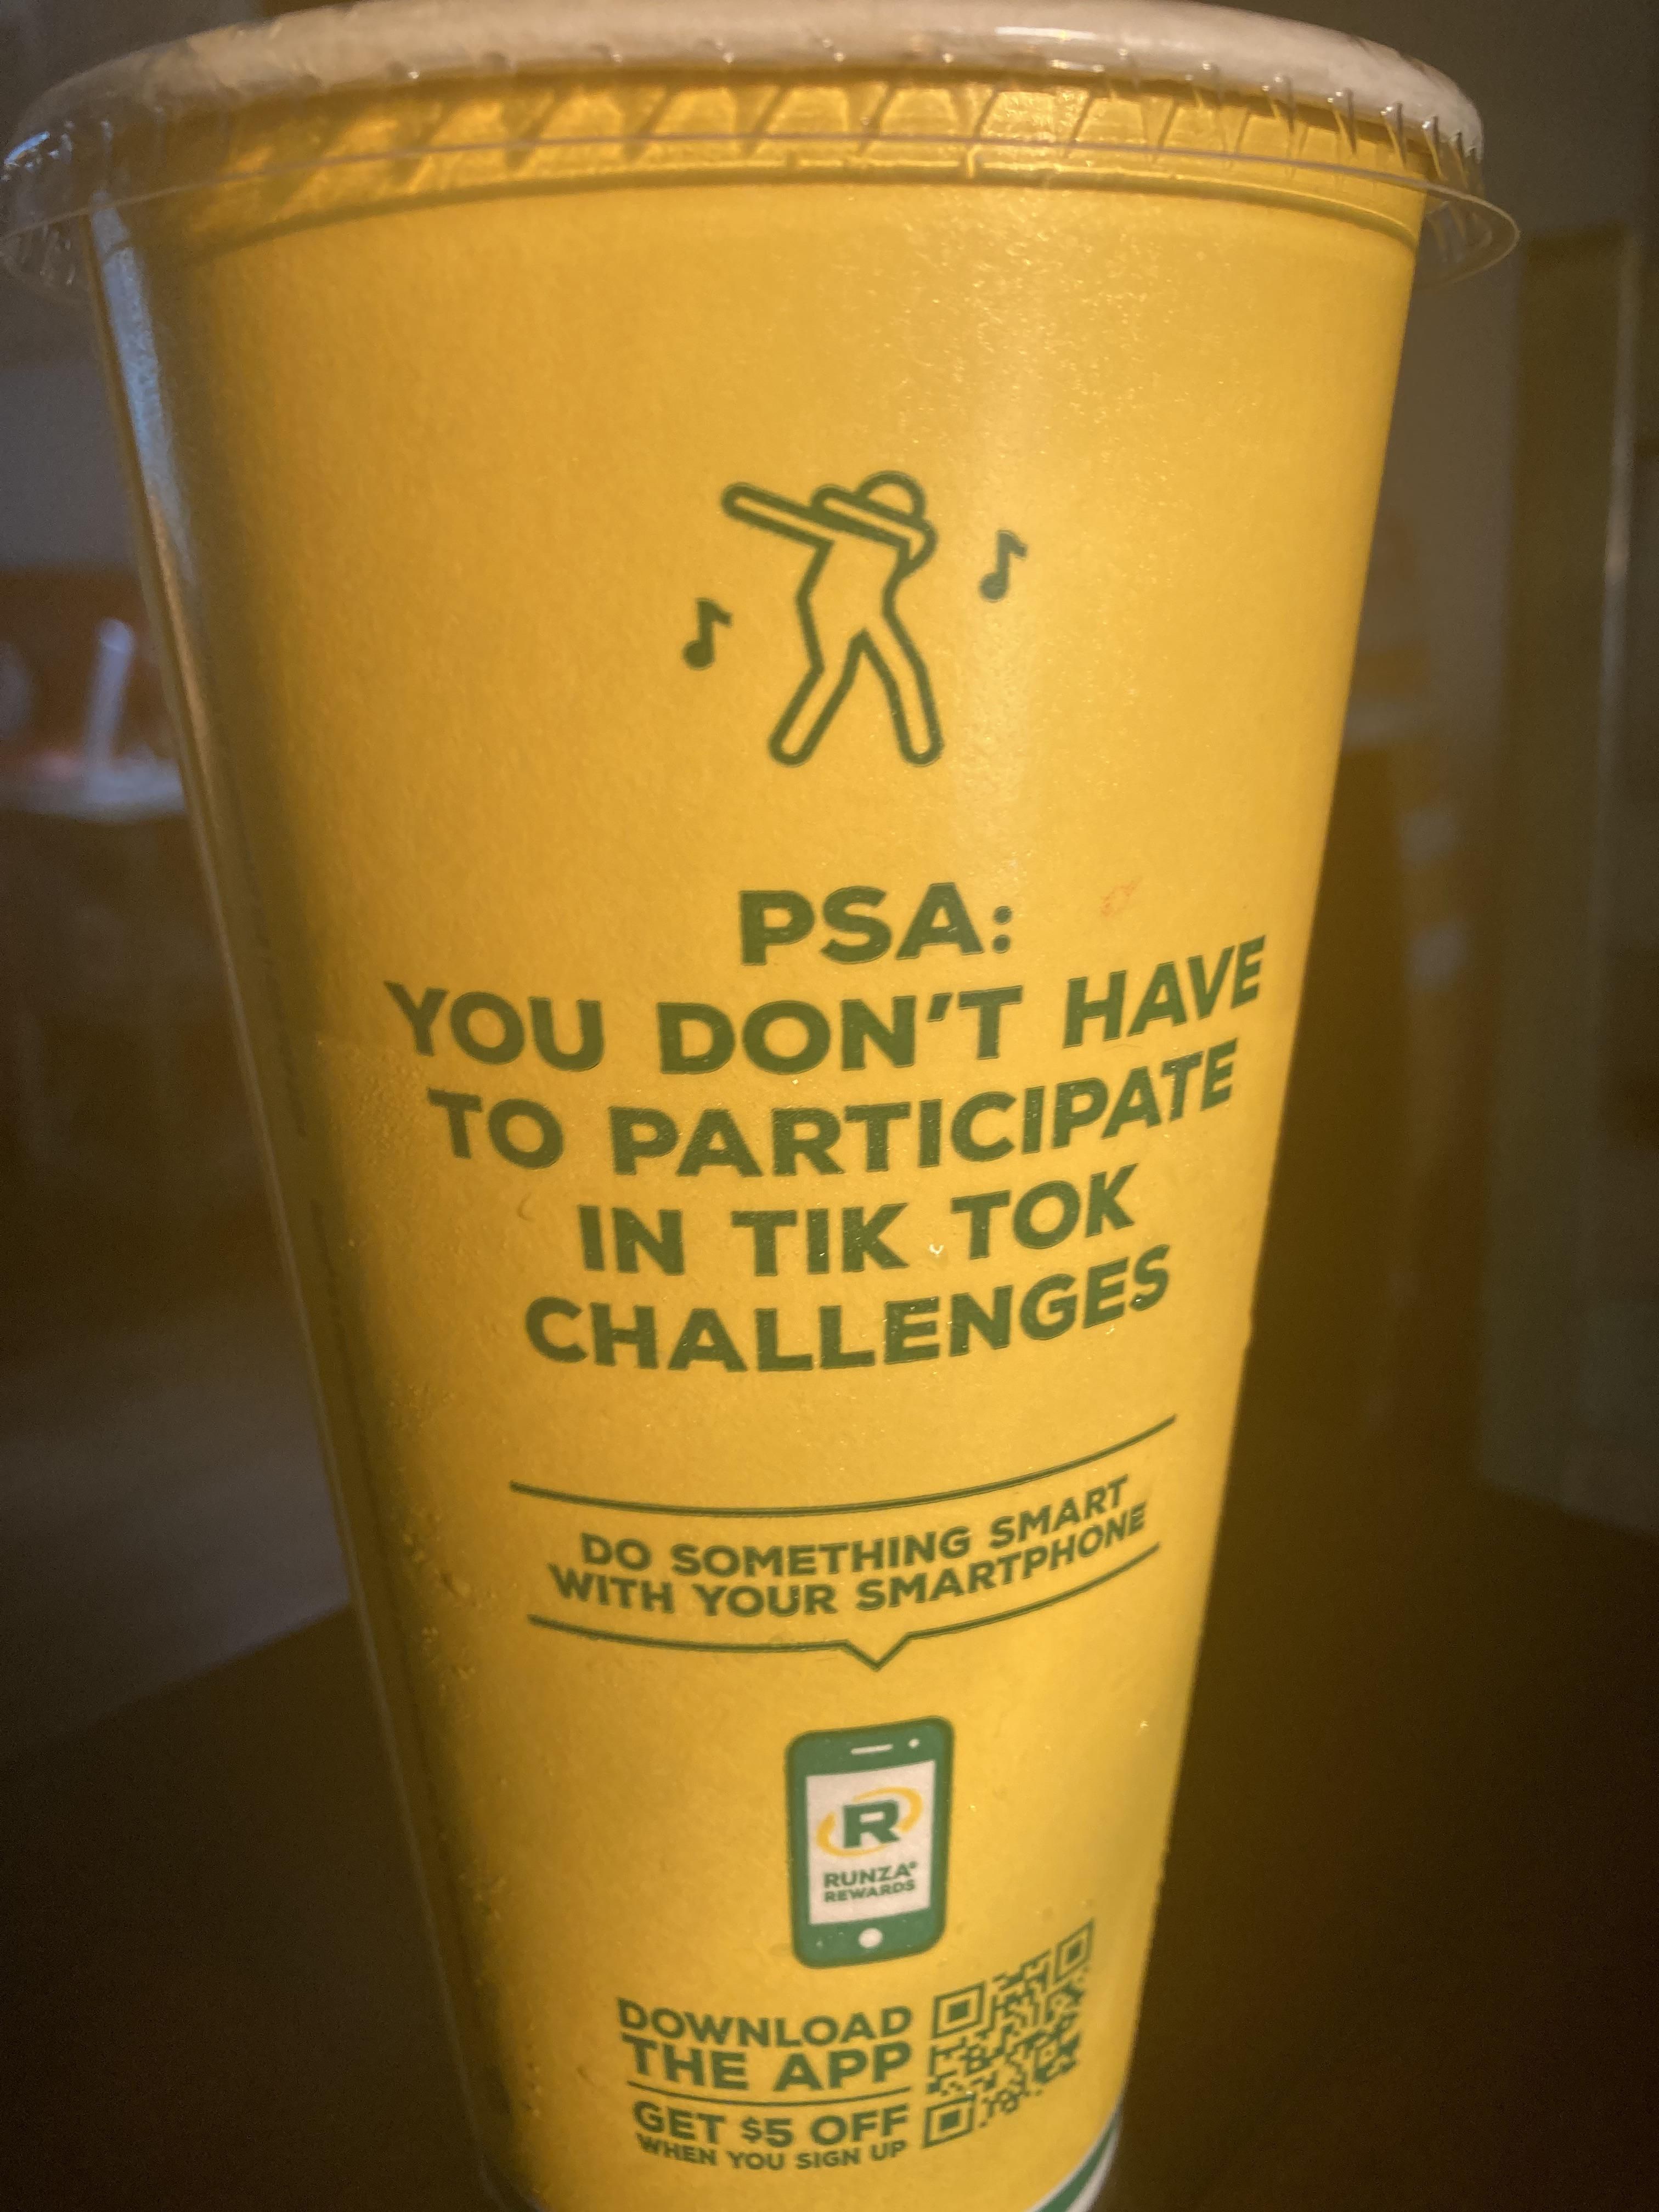 Found this on a Runza soda drink